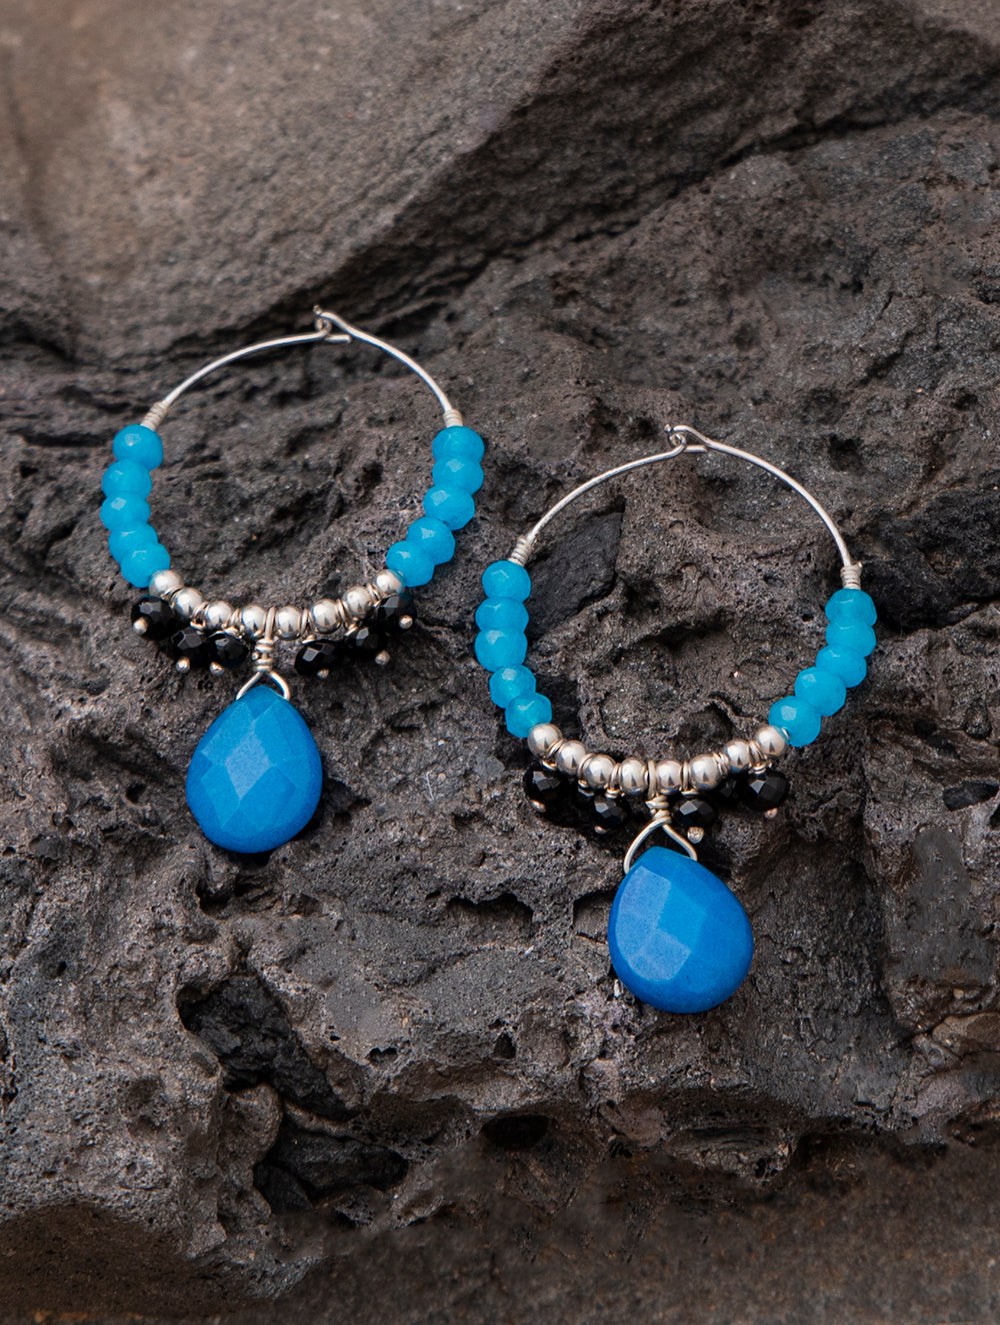 Load image into Gallery viewer, Pure Silver Earrings With Semi Precious Stones - Oceanic Hoops